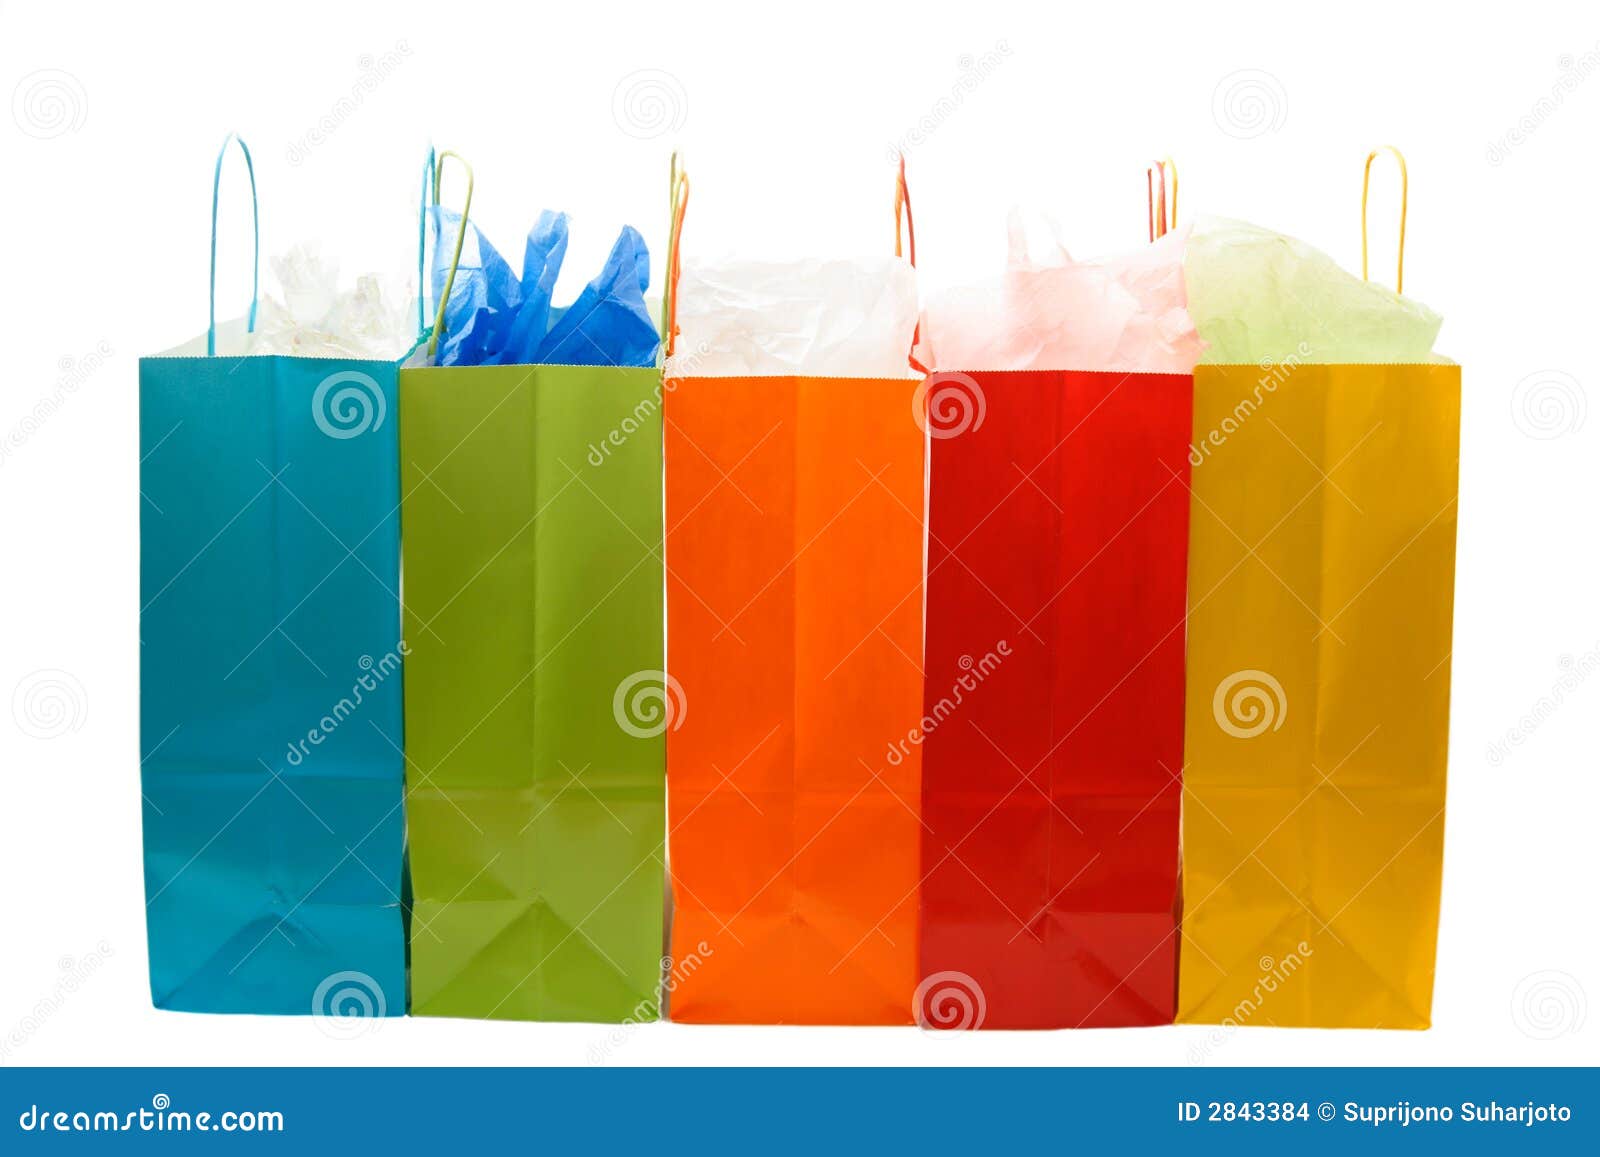 Shopping bags stock photo. Image of commercial, fashion - 2843384